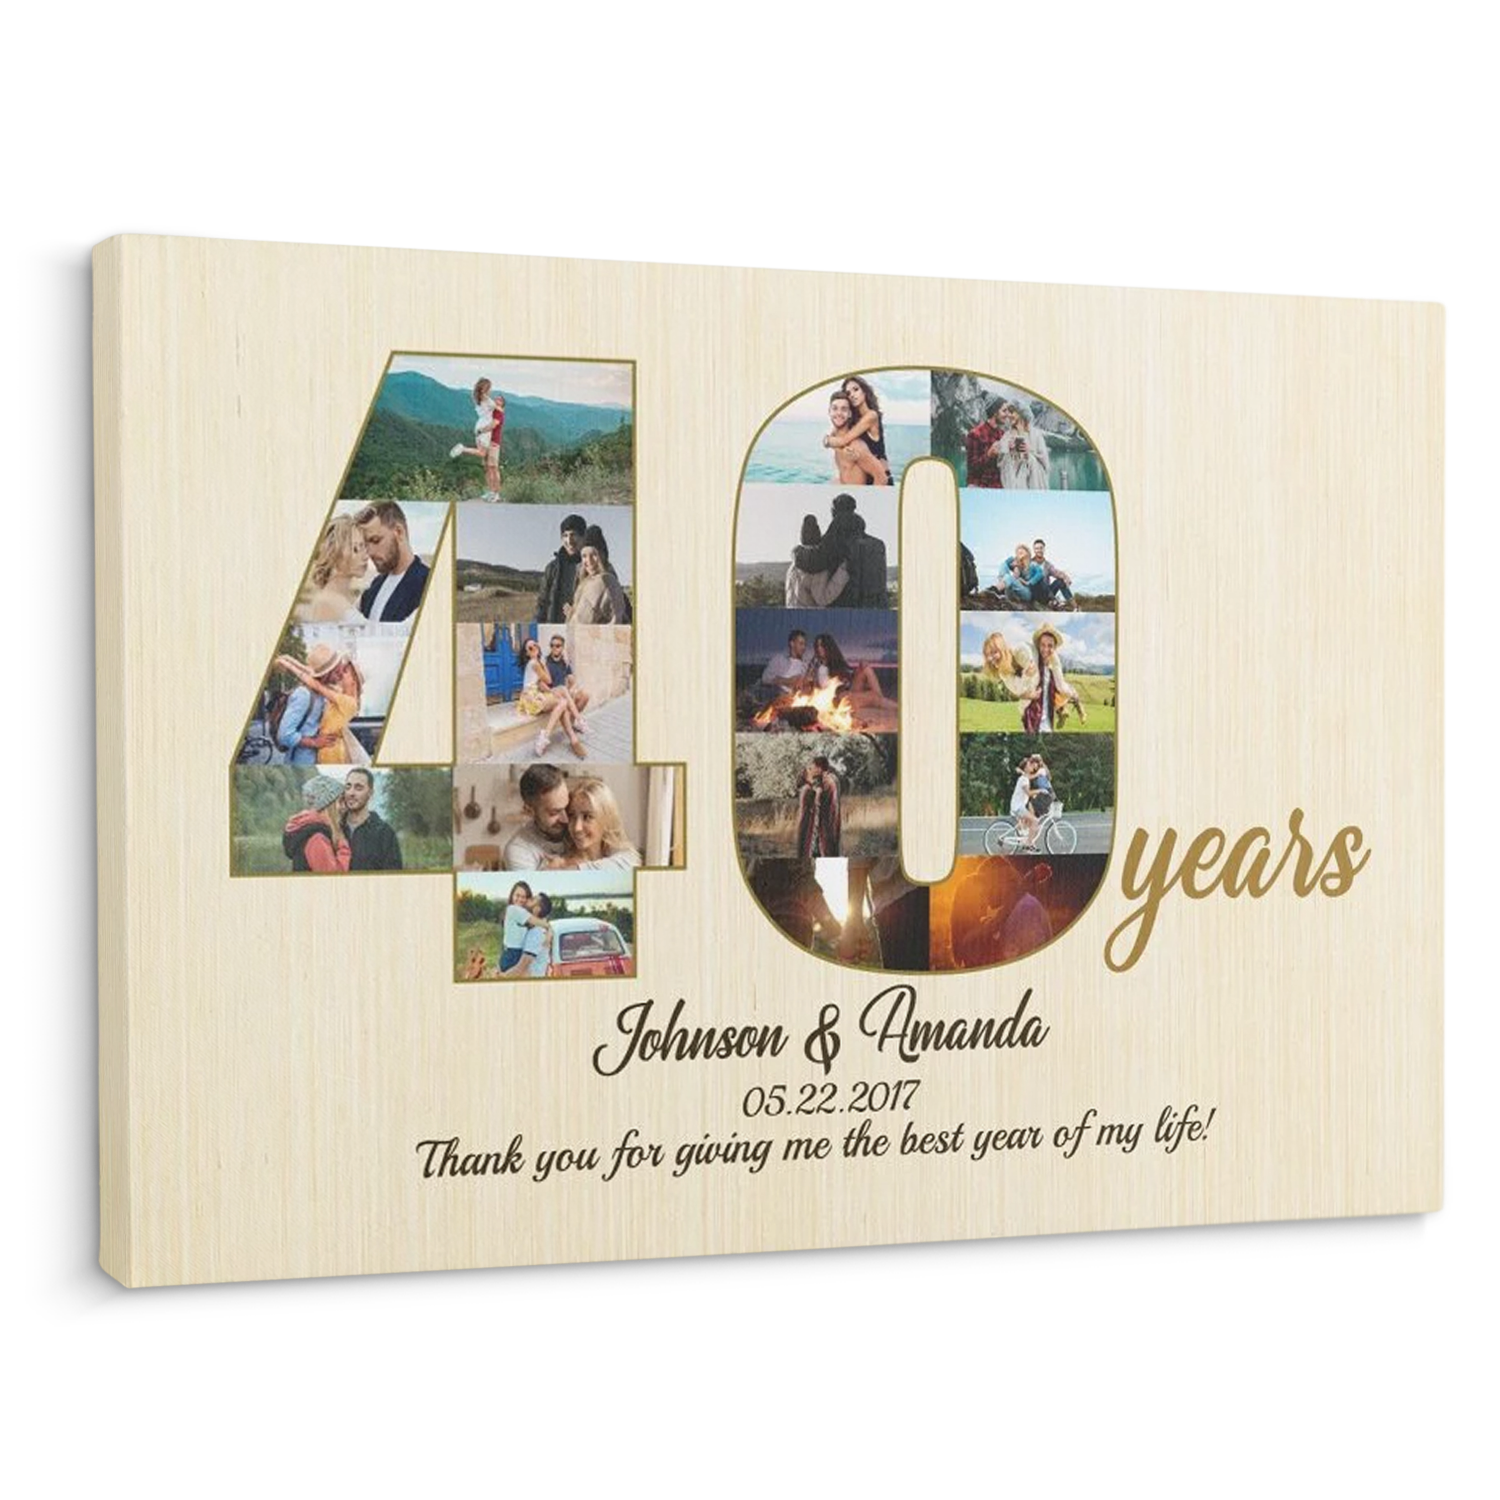 Best 40th Wedding Anniversary Gift Ideas | 40th wedding anniversary, 40th  wedding anniversary gifts, 40th anniversary gifts